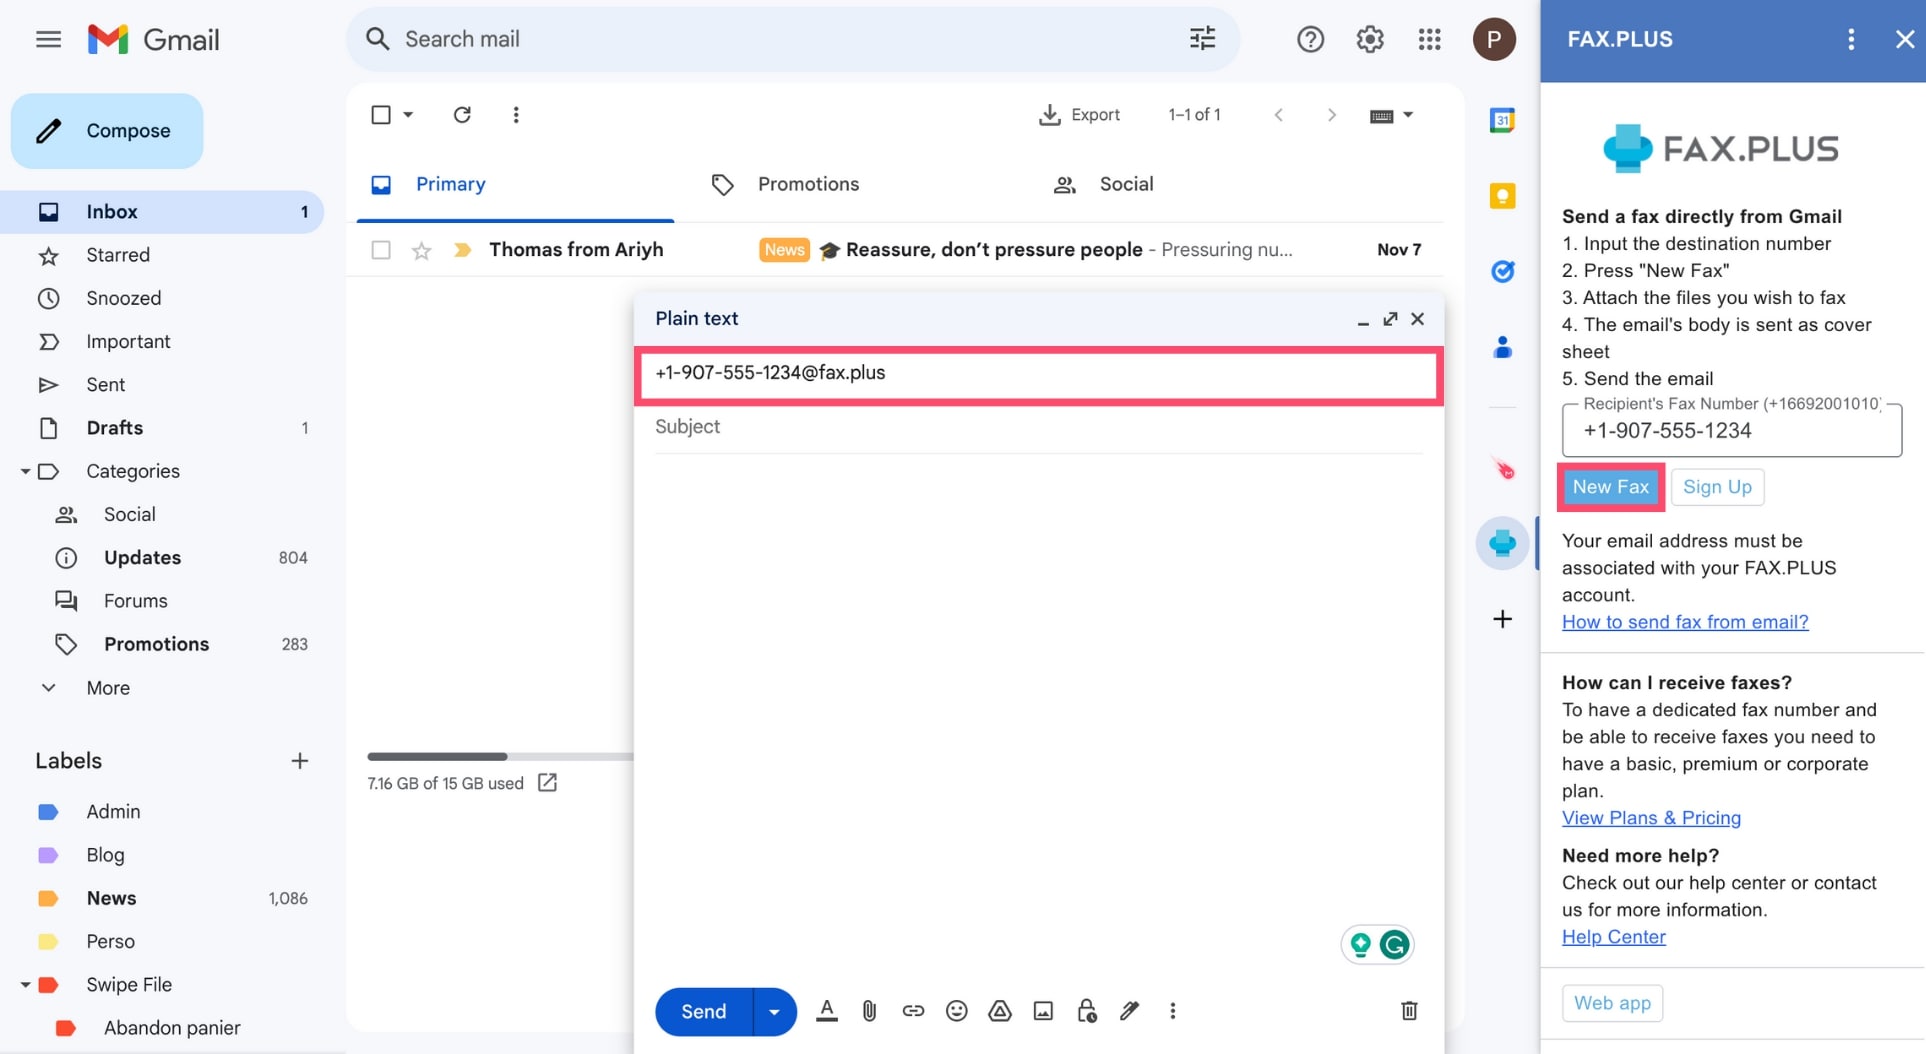 Create a new fax in Gmail